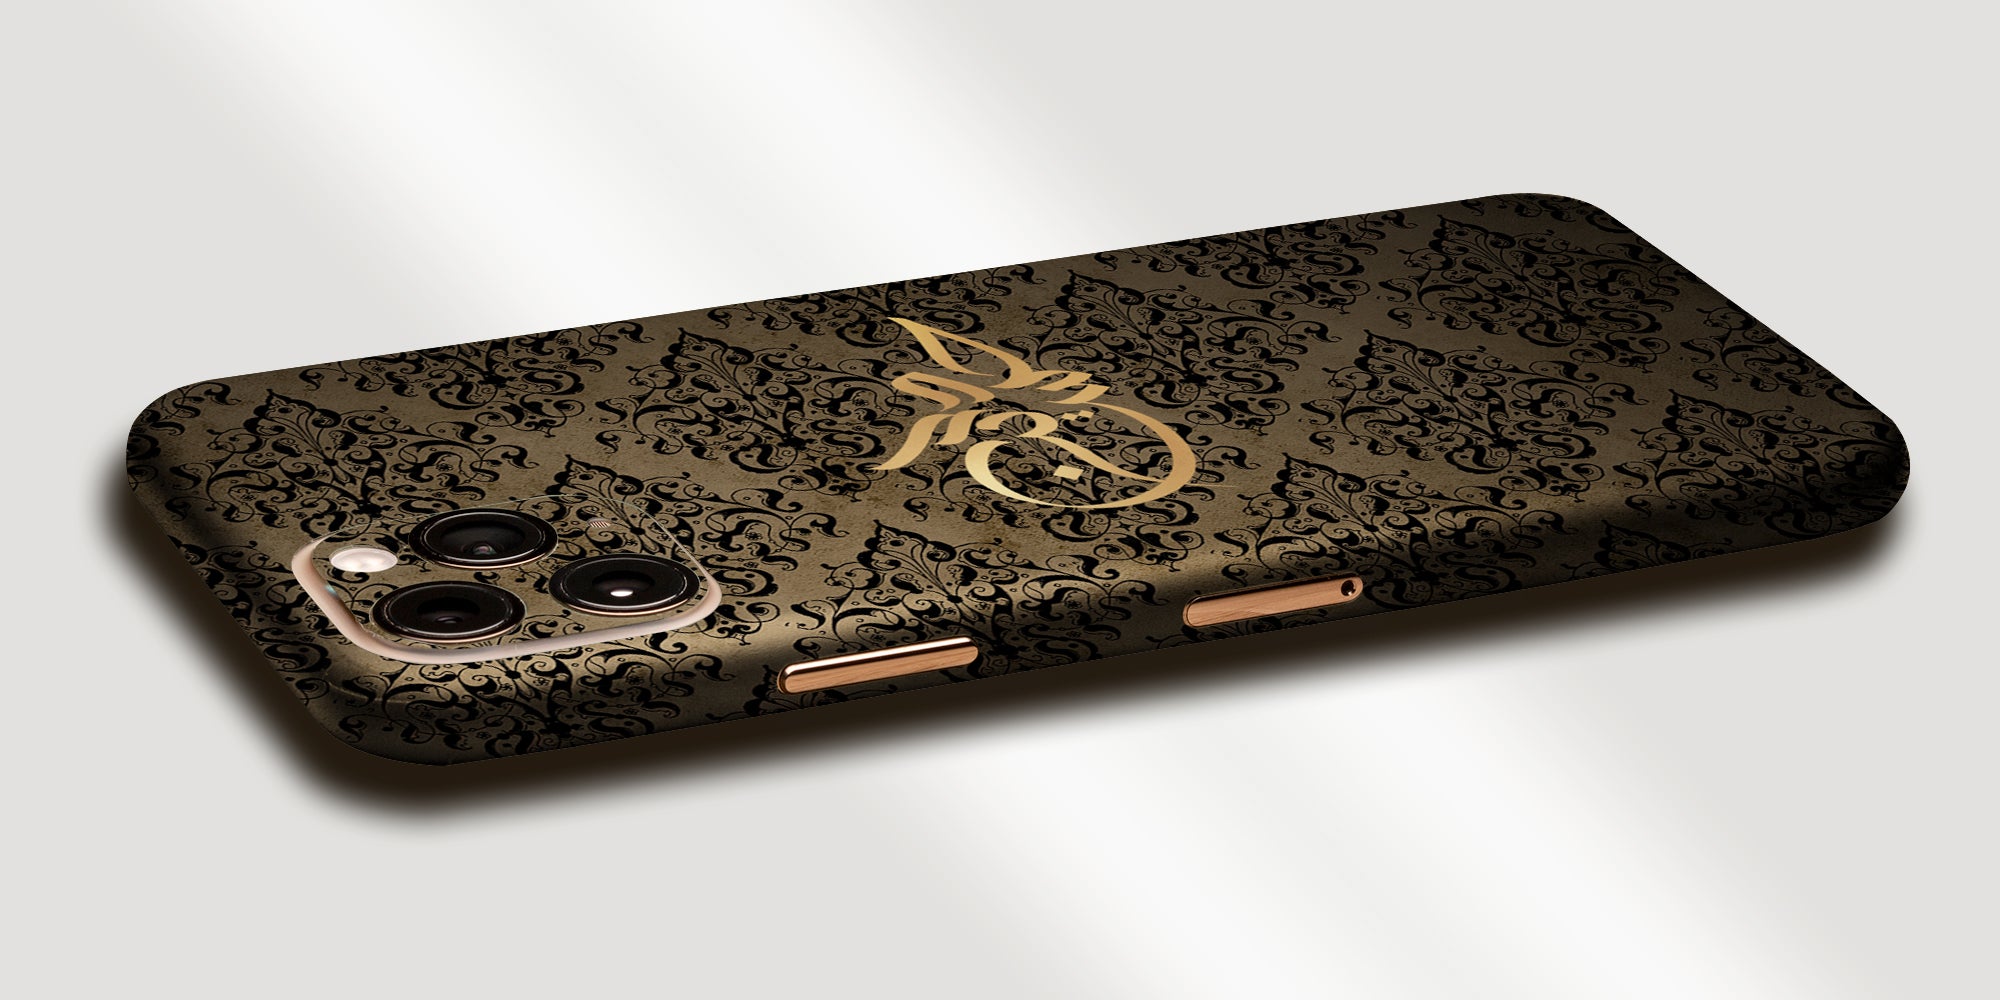 Damask Design Decal Skin With Personalised Arabic Name Phone Wrap - Gold / Black